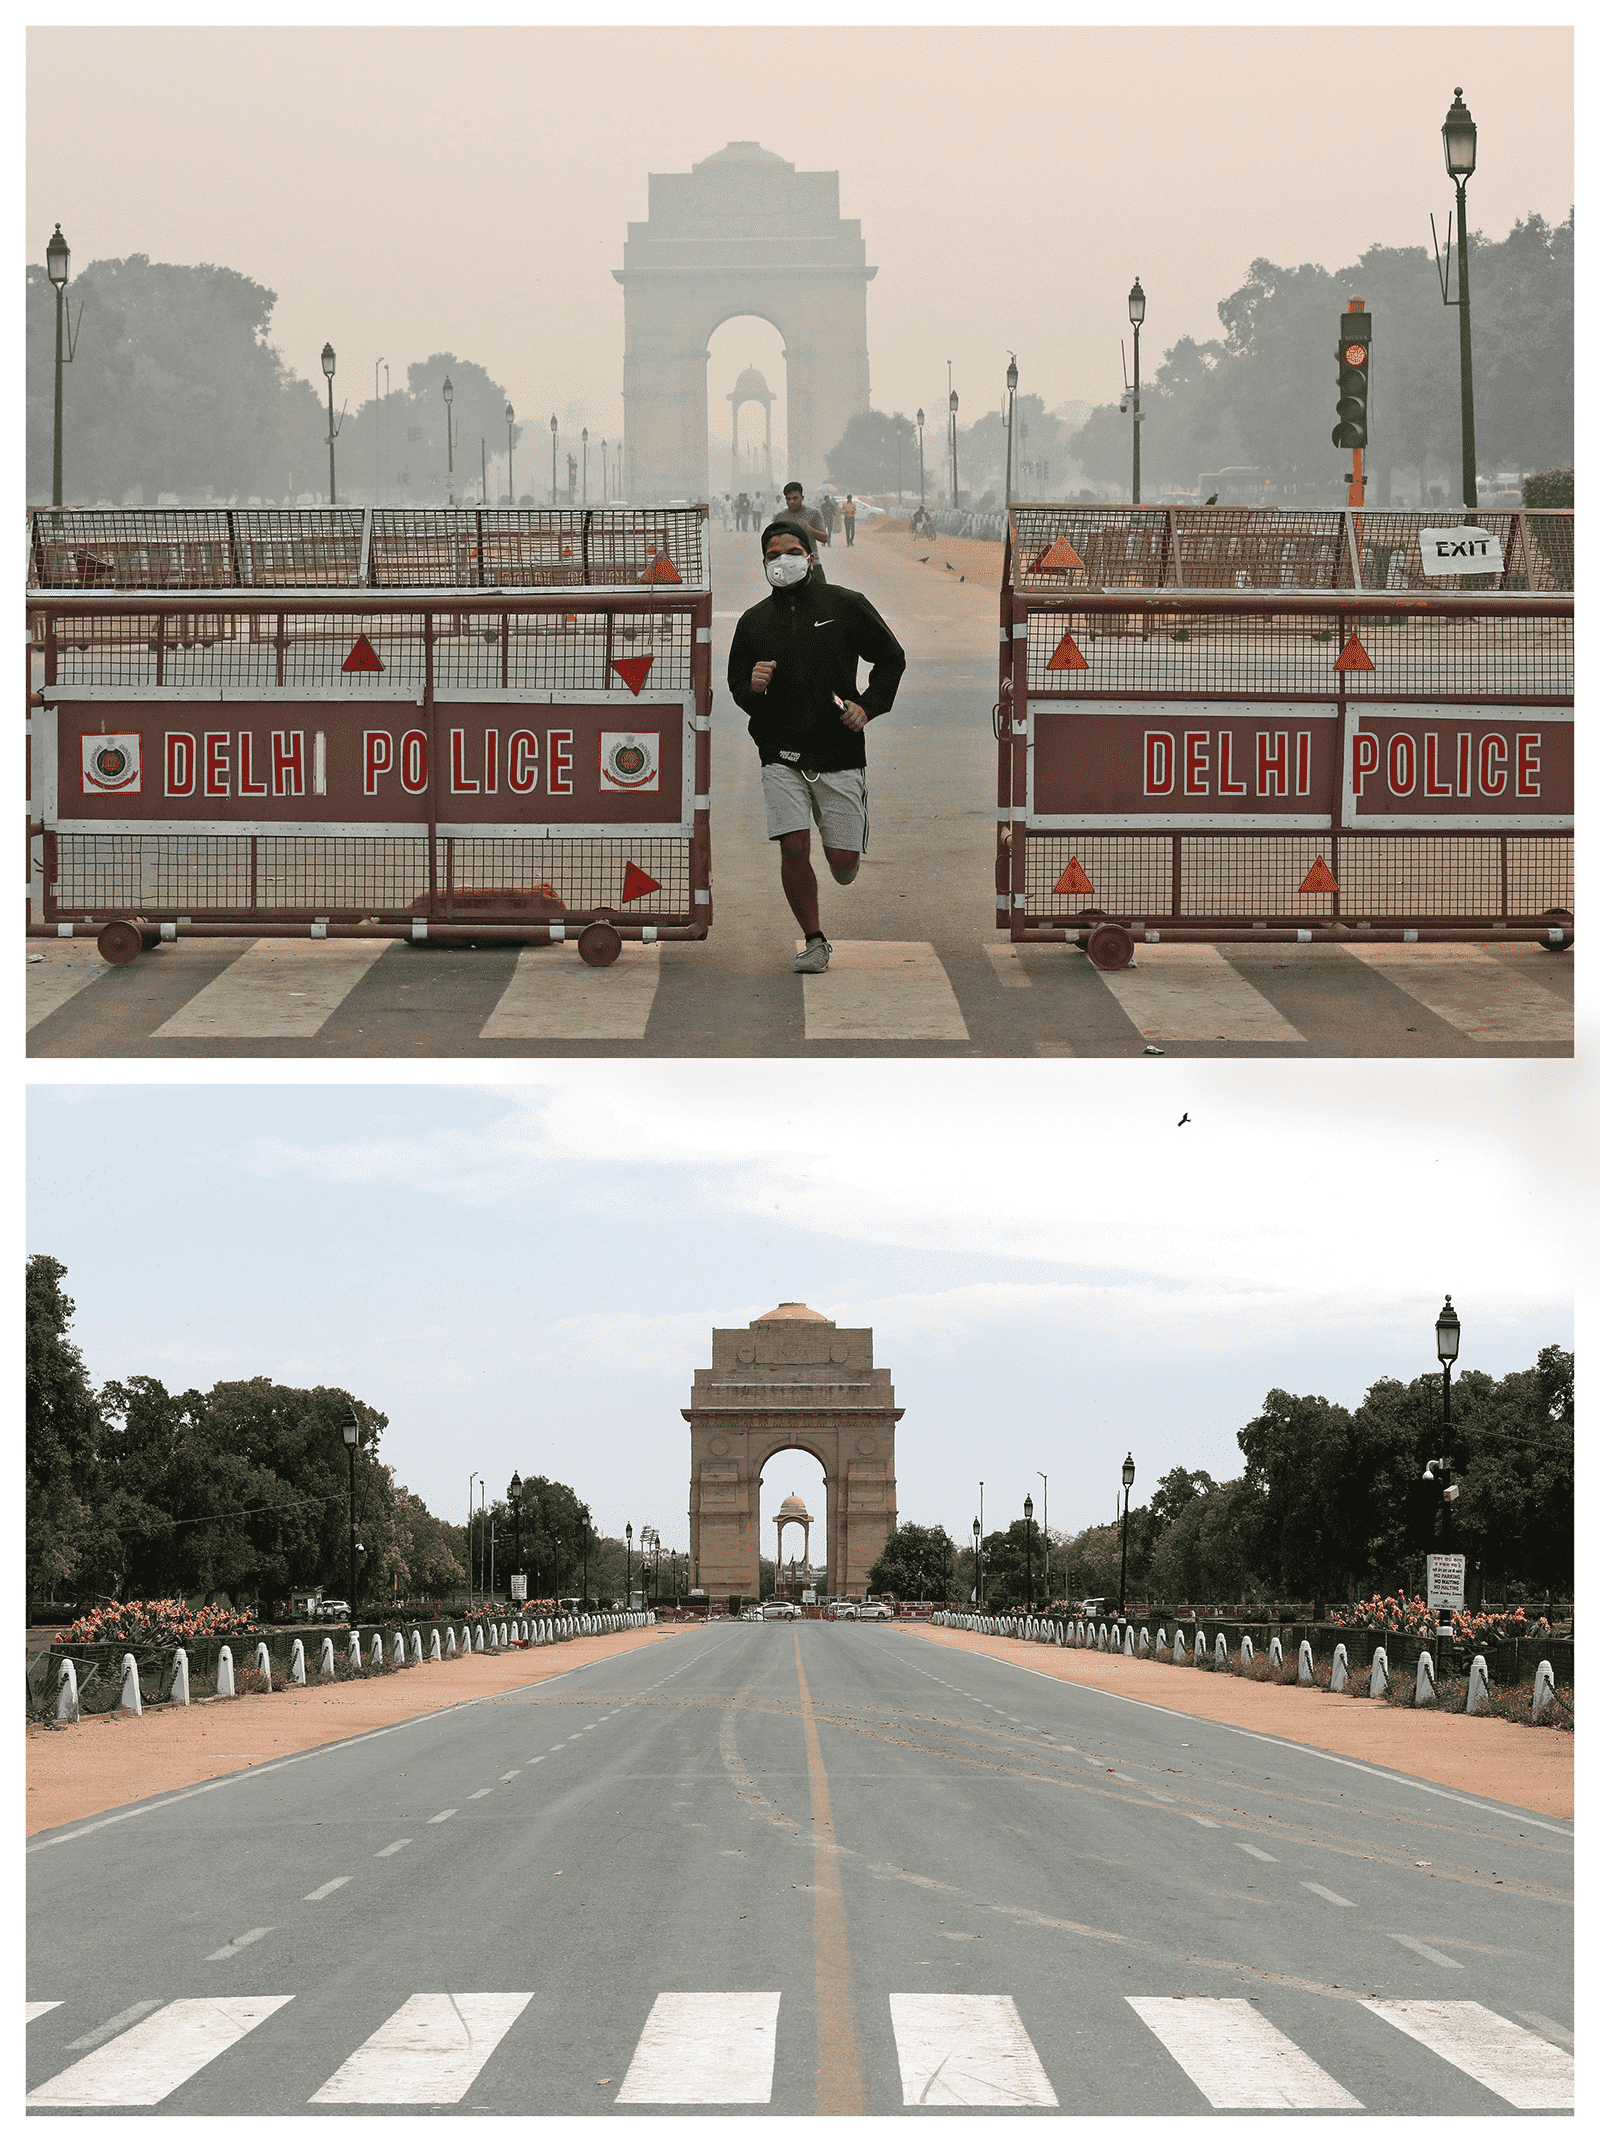 The pandemic has shifted investor priorities in what Hartford calls an awareness wake-up call. This metropolitan area in India, once covered in smog, was clear during the pandemic when fewer people were out on the road, causing many to look at the ways our everyday choices are affecting the planet.